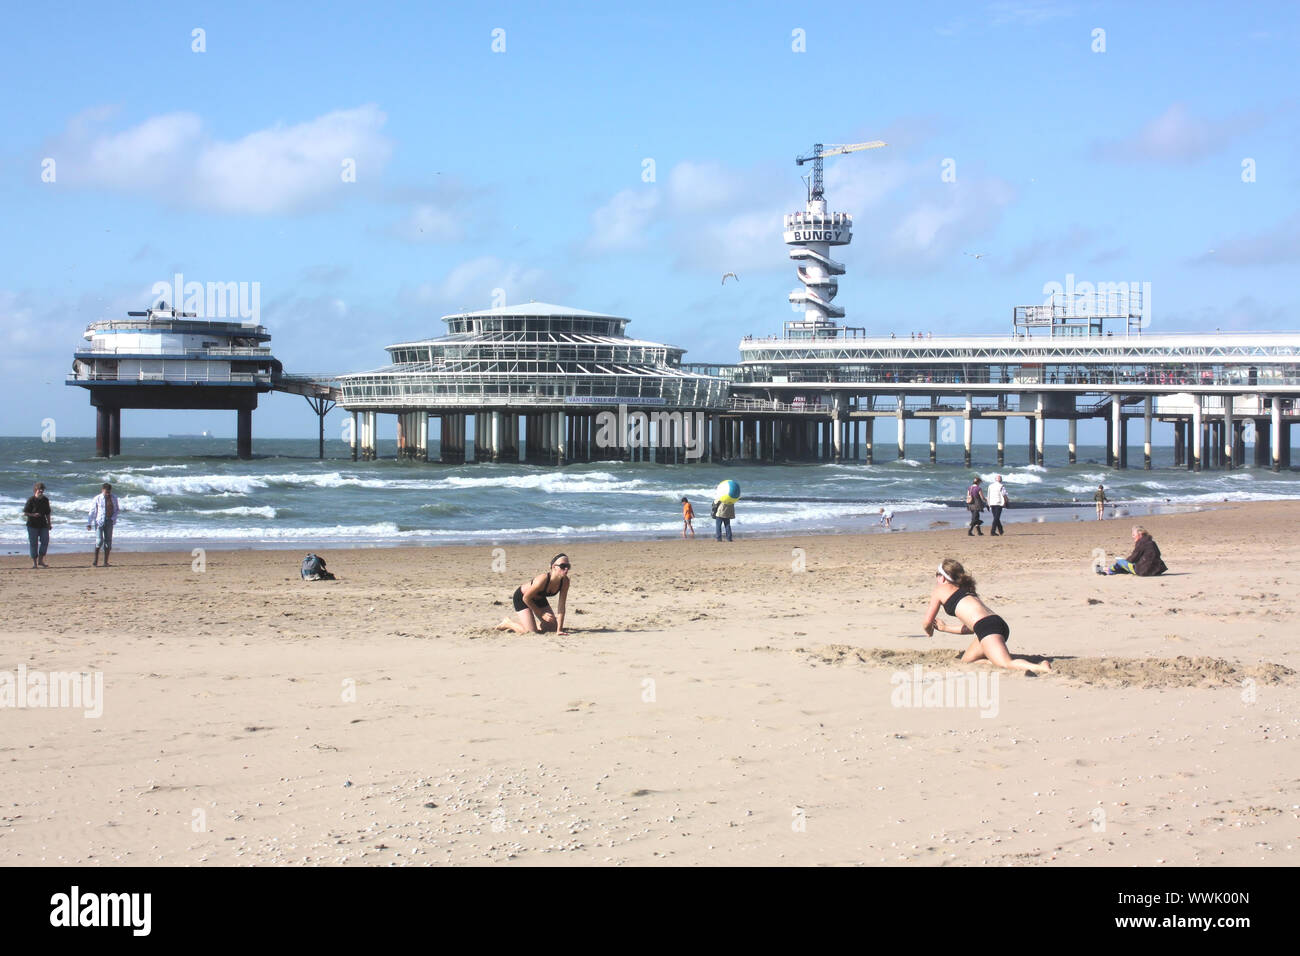 De Pier in Scheveningen gives a magnificent view of the shoreline and the sea. the underground is sealed with strong glass walls and has many shops. Stock Photo